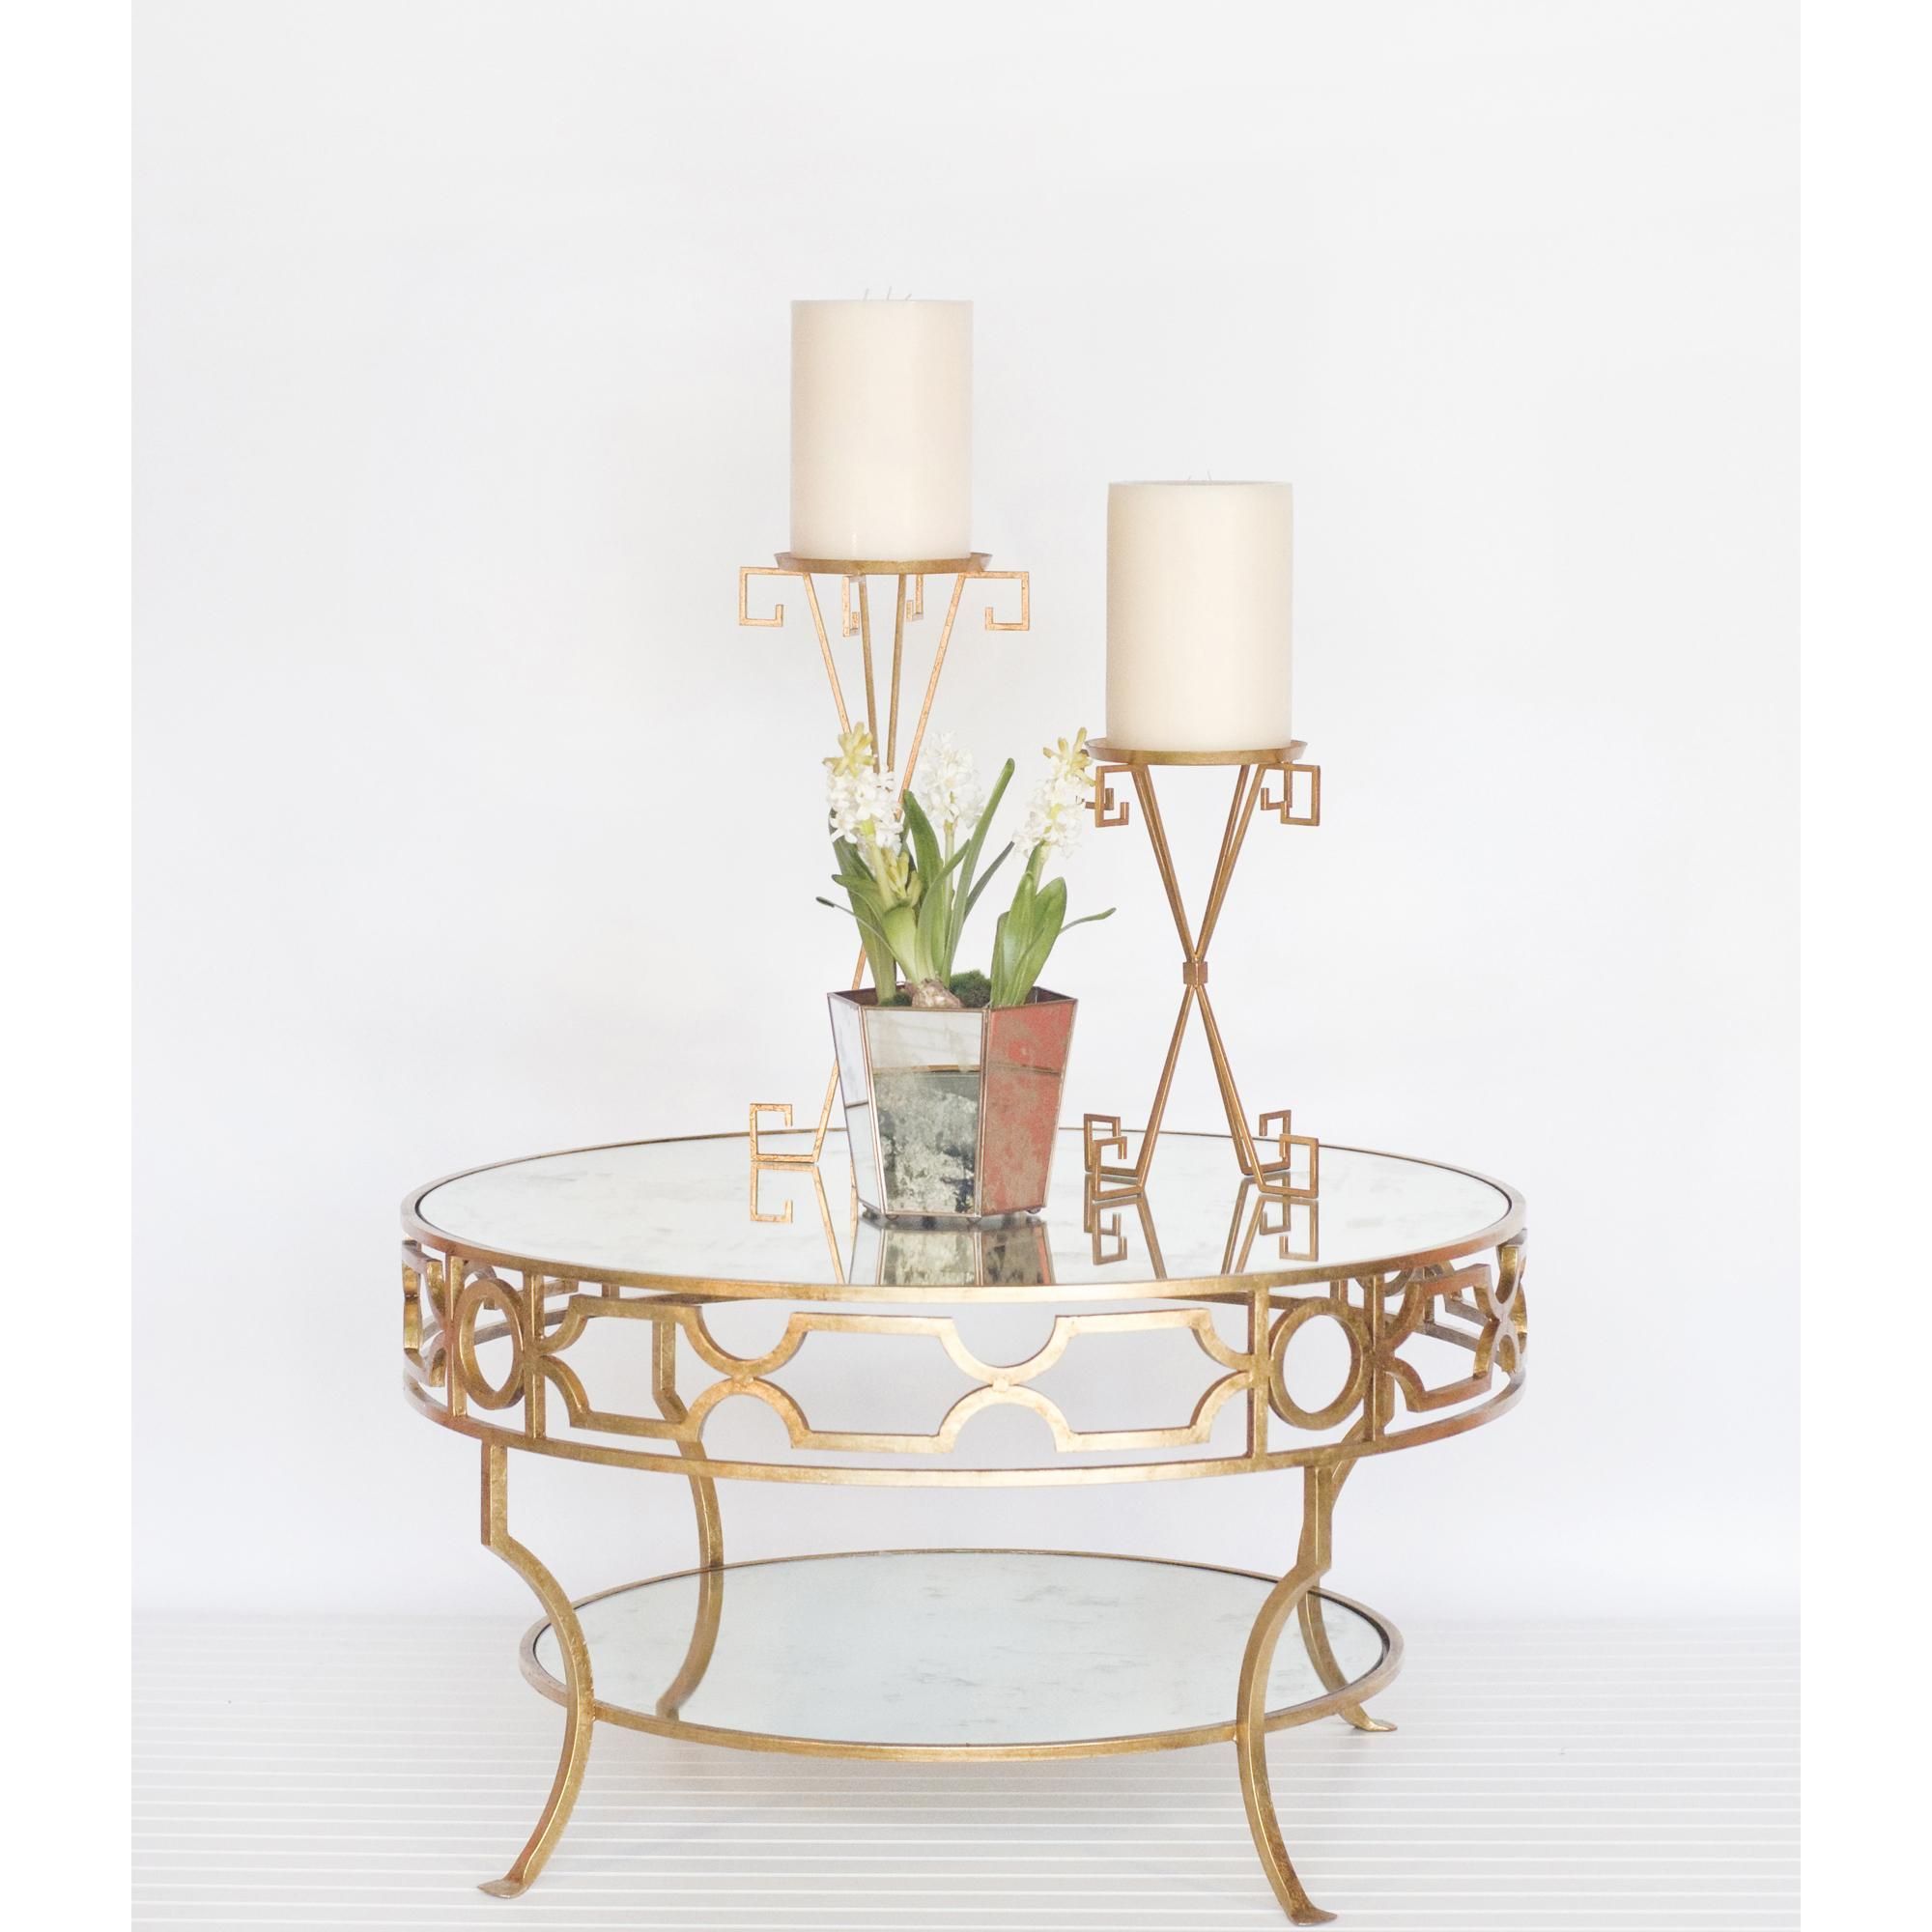 Two Tier Gold Leaf Coffee Table With Antique Mirror Throughout Leaf Round Coffee Tables (View 13 of 15)